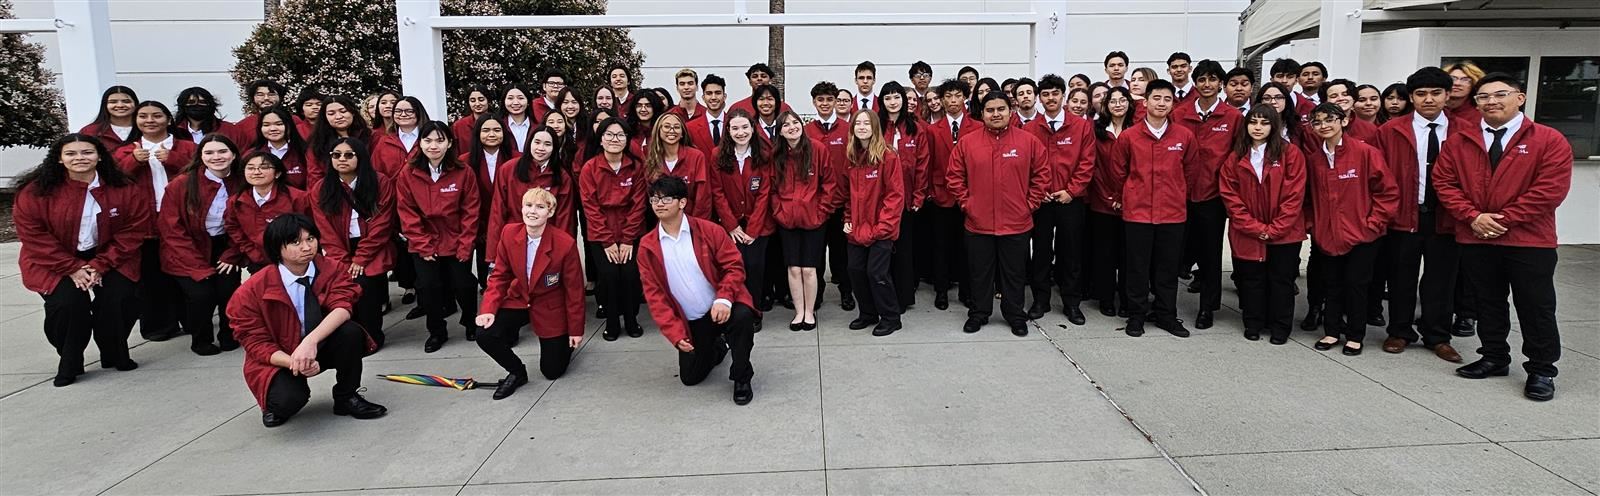  SkillsUSA State Competition Attendees